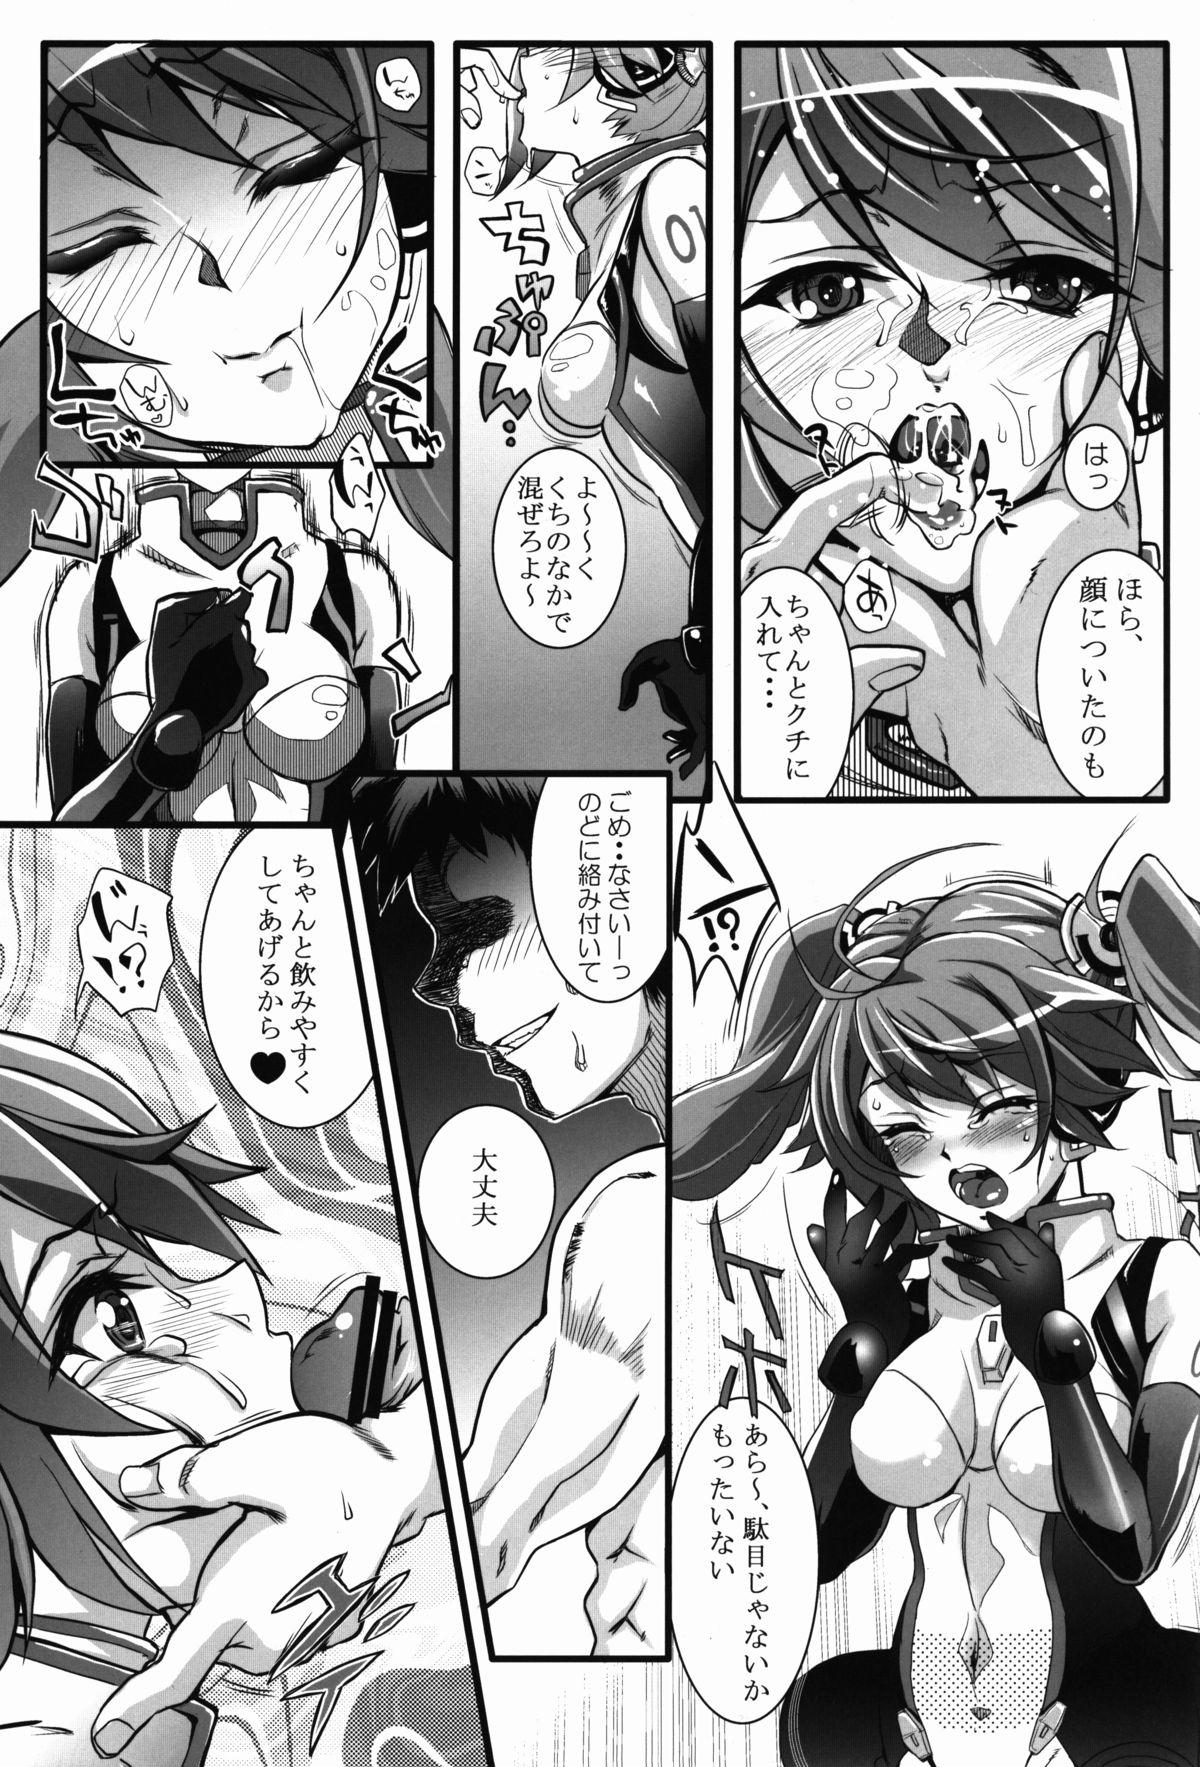 Gostosa Racing Angeloid - Vocaloid Shy - Page 11